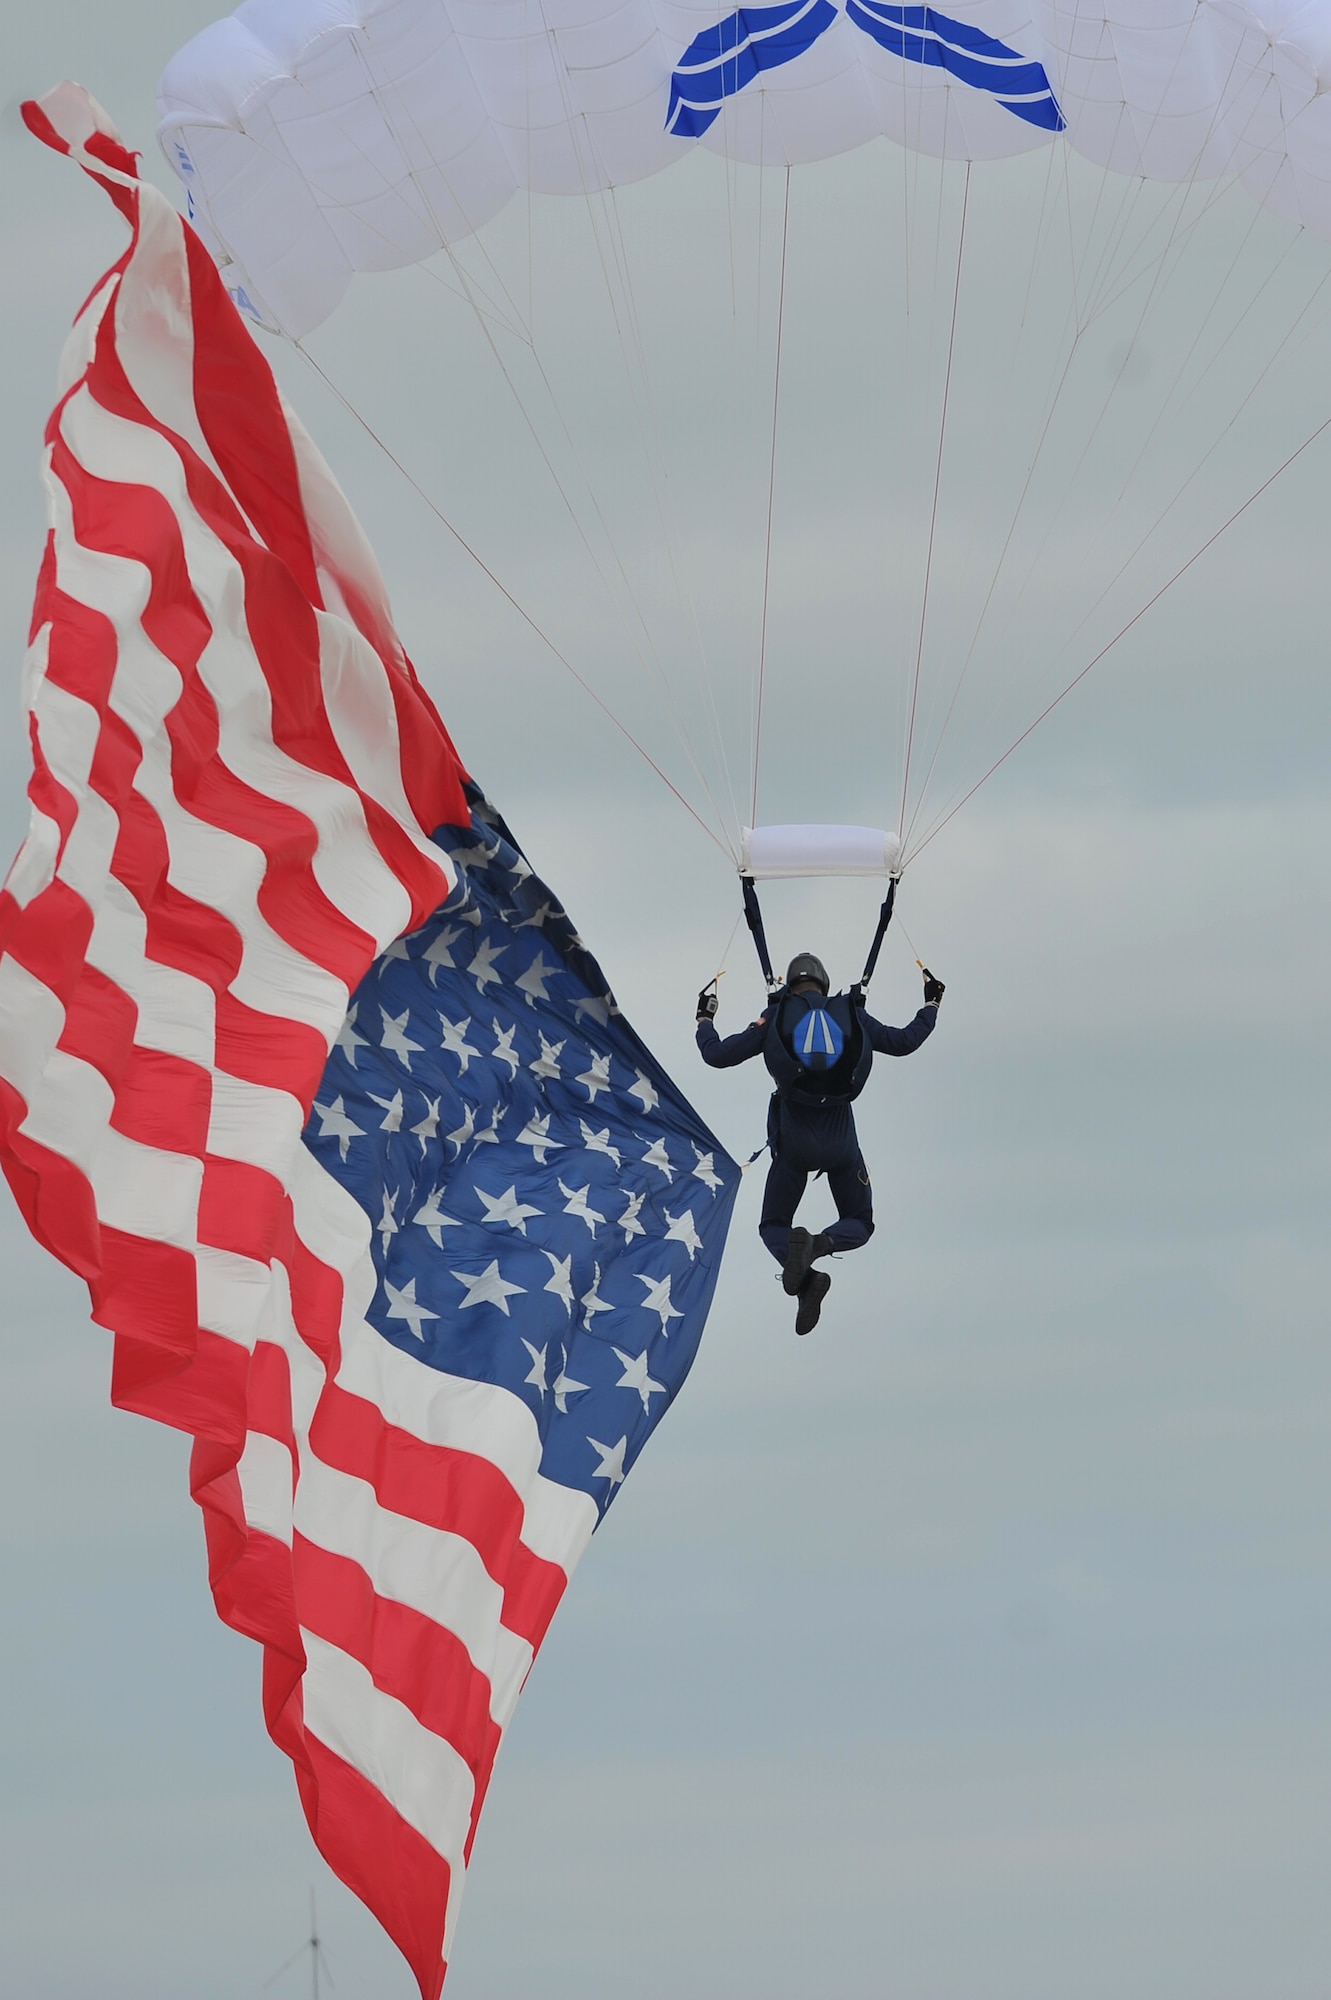 ALTUS AIR FORCE BASE, Okla. – A member of the U.S. Air Force Academy Wings of Blue parachute demonstration team presents the U.S. flag during the 2014 Wings of Freedom Open House, Sept. 13, 2014. The Wings of Blue demonstration team travels across the country to airshows, sporting events, and other venues to represent the Air Force in precision parachuting. (U.S. Air Force photo by Senior Airman Dillon Davis/Released)